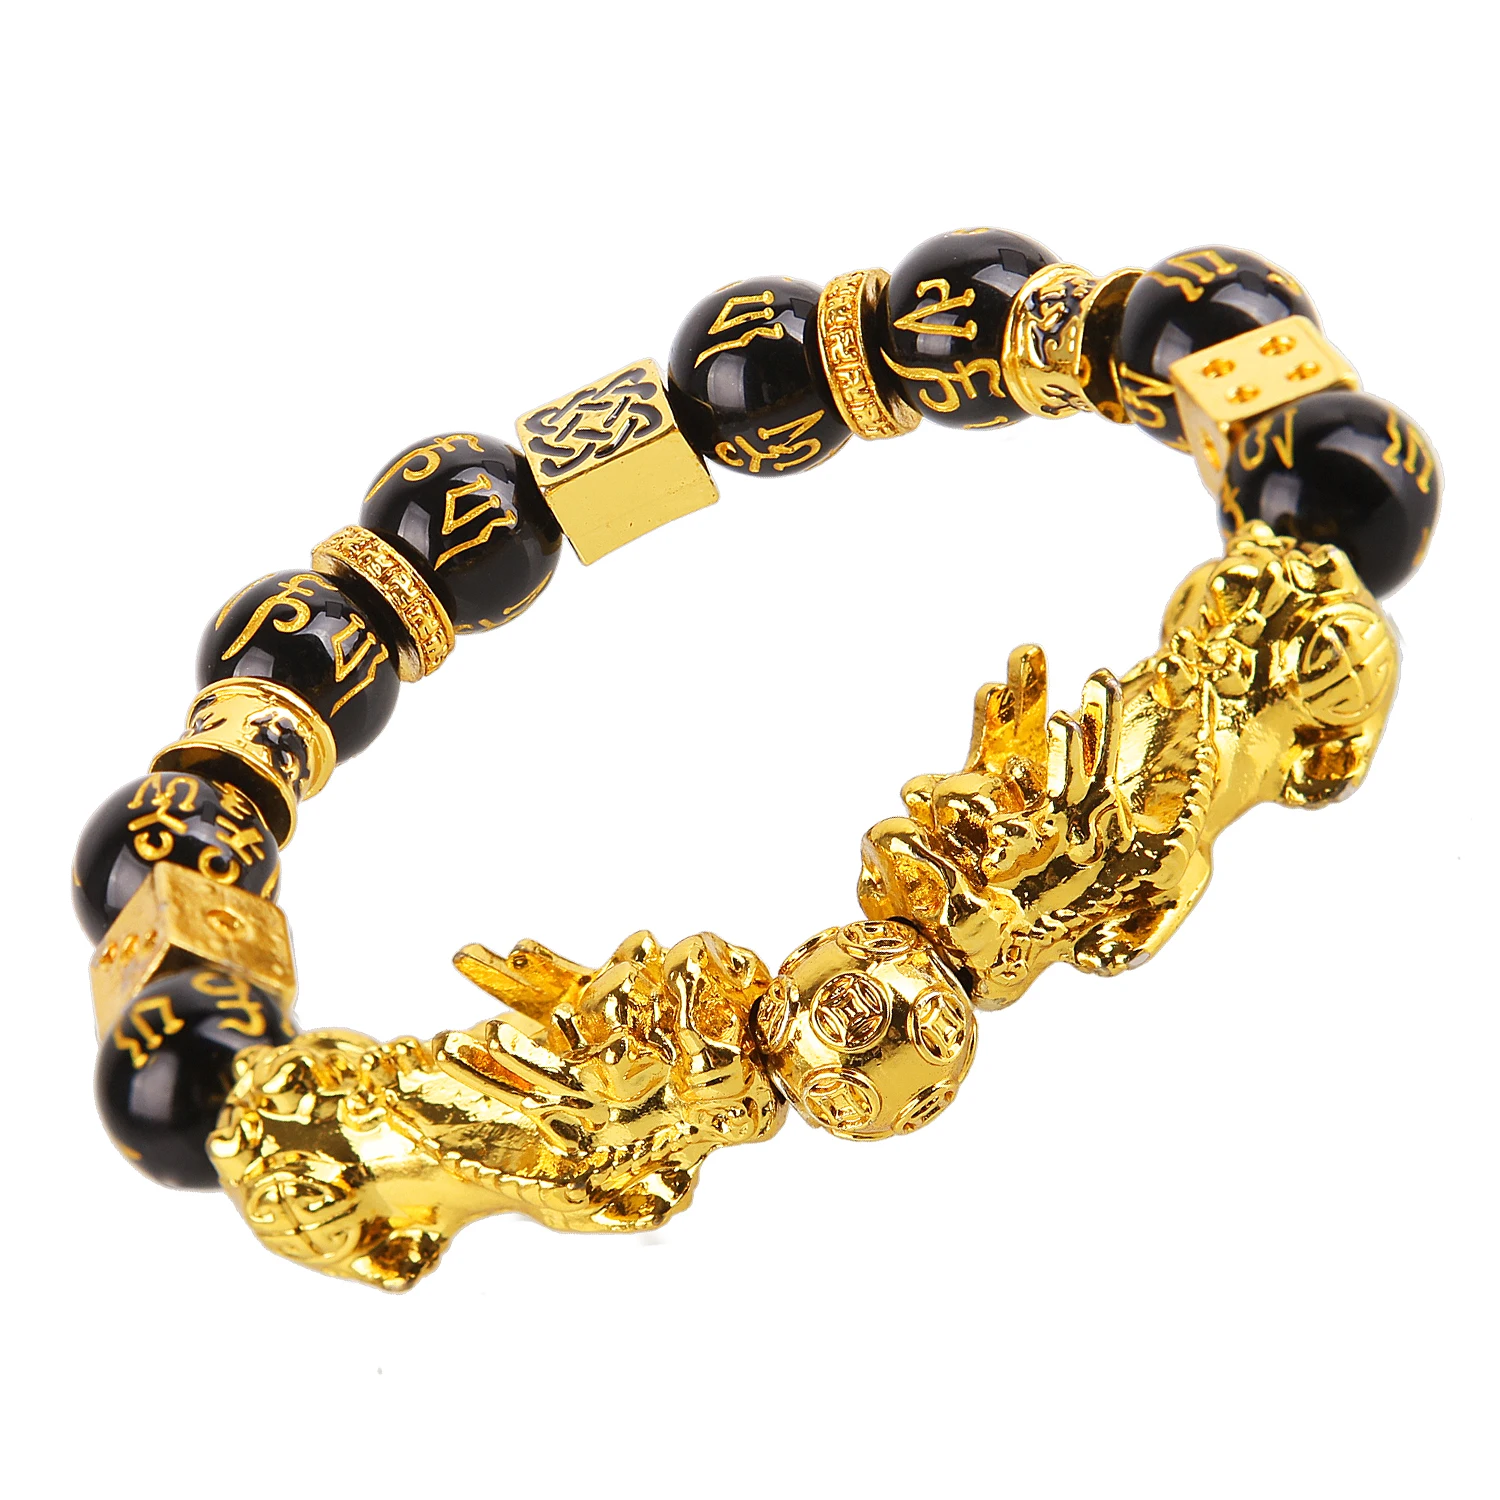 

Wholesale Obsidian Stone Beads Bracelet Men Women Unisex Wristband Gold Black Pixiu Wealth and Good Luck Brave chain, As shown